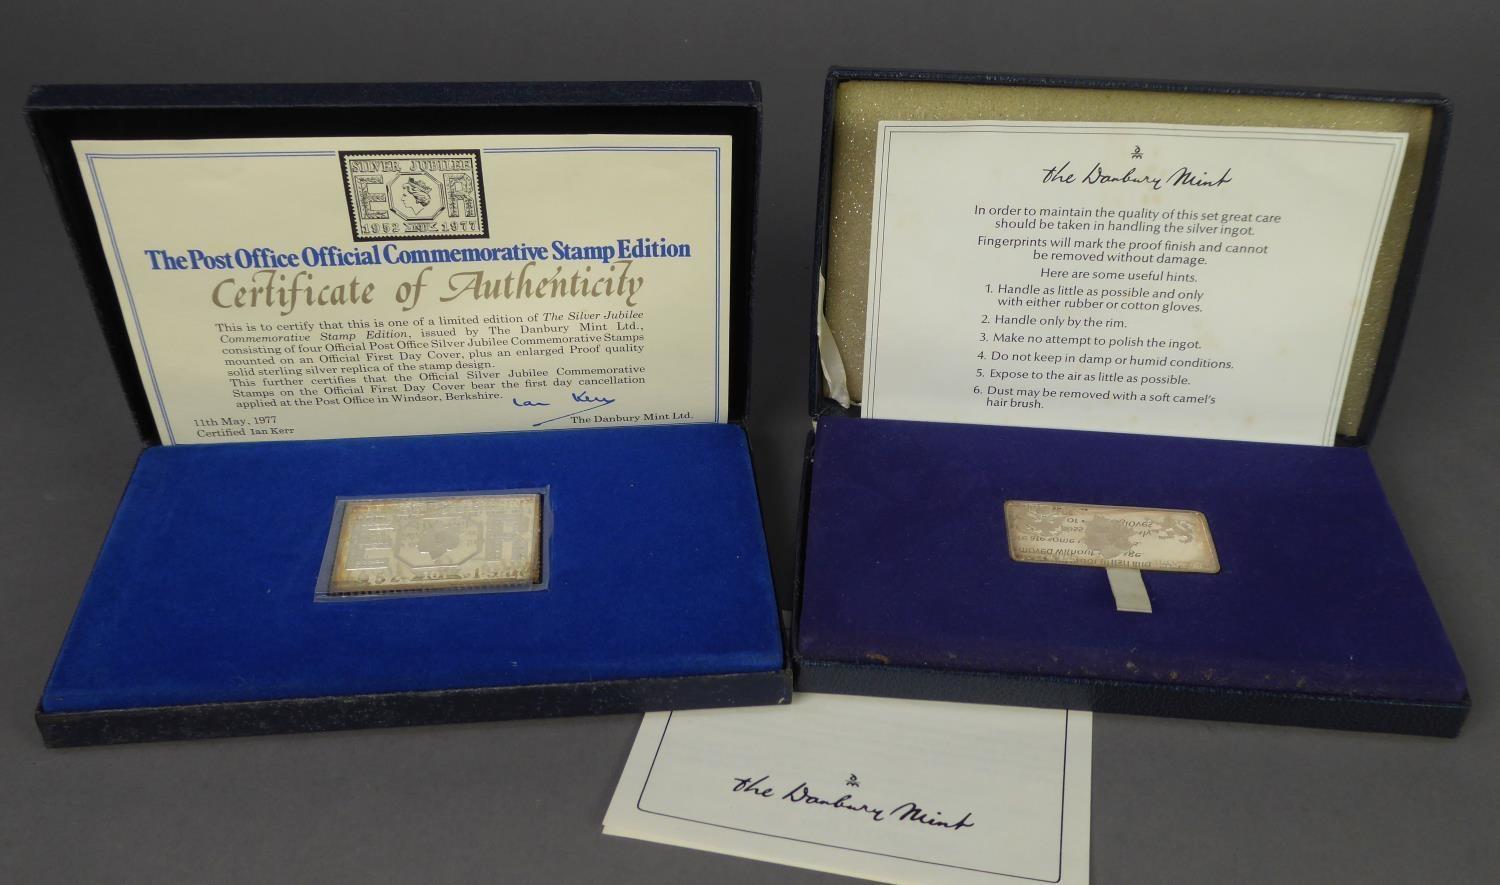 THE DANBURY MIHNT SILVER INGOT COMMEMORATING THE STATE VISIT OF QUEEN ELIZABETH II TO THE USA, on - Image 2 of 2